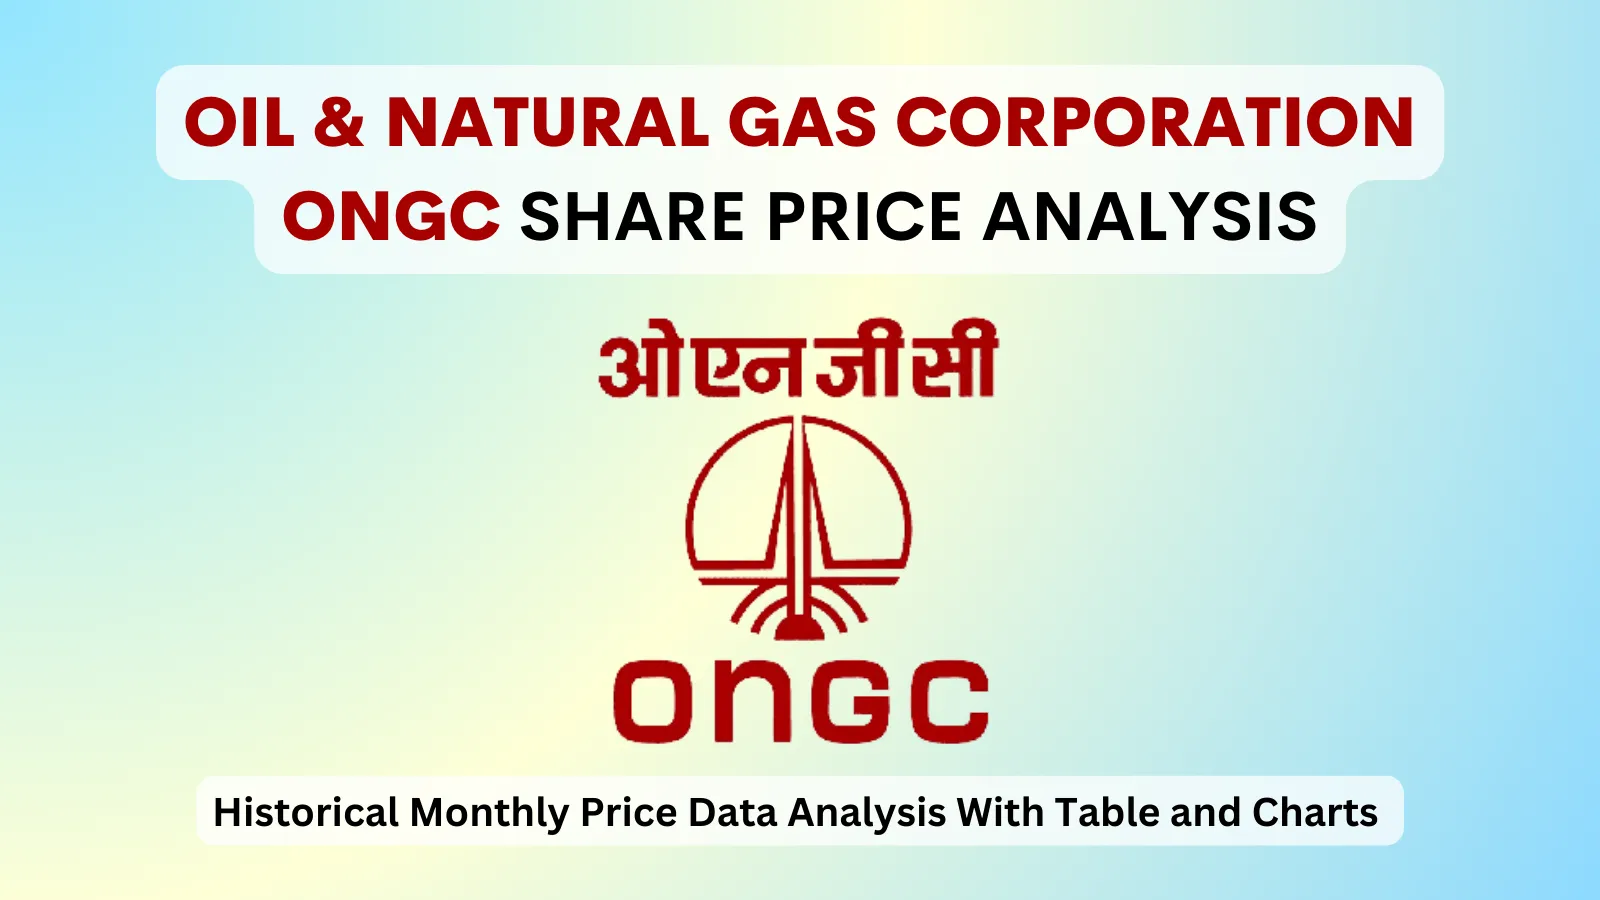 Oil and Natural Gas Corporation share price analysis